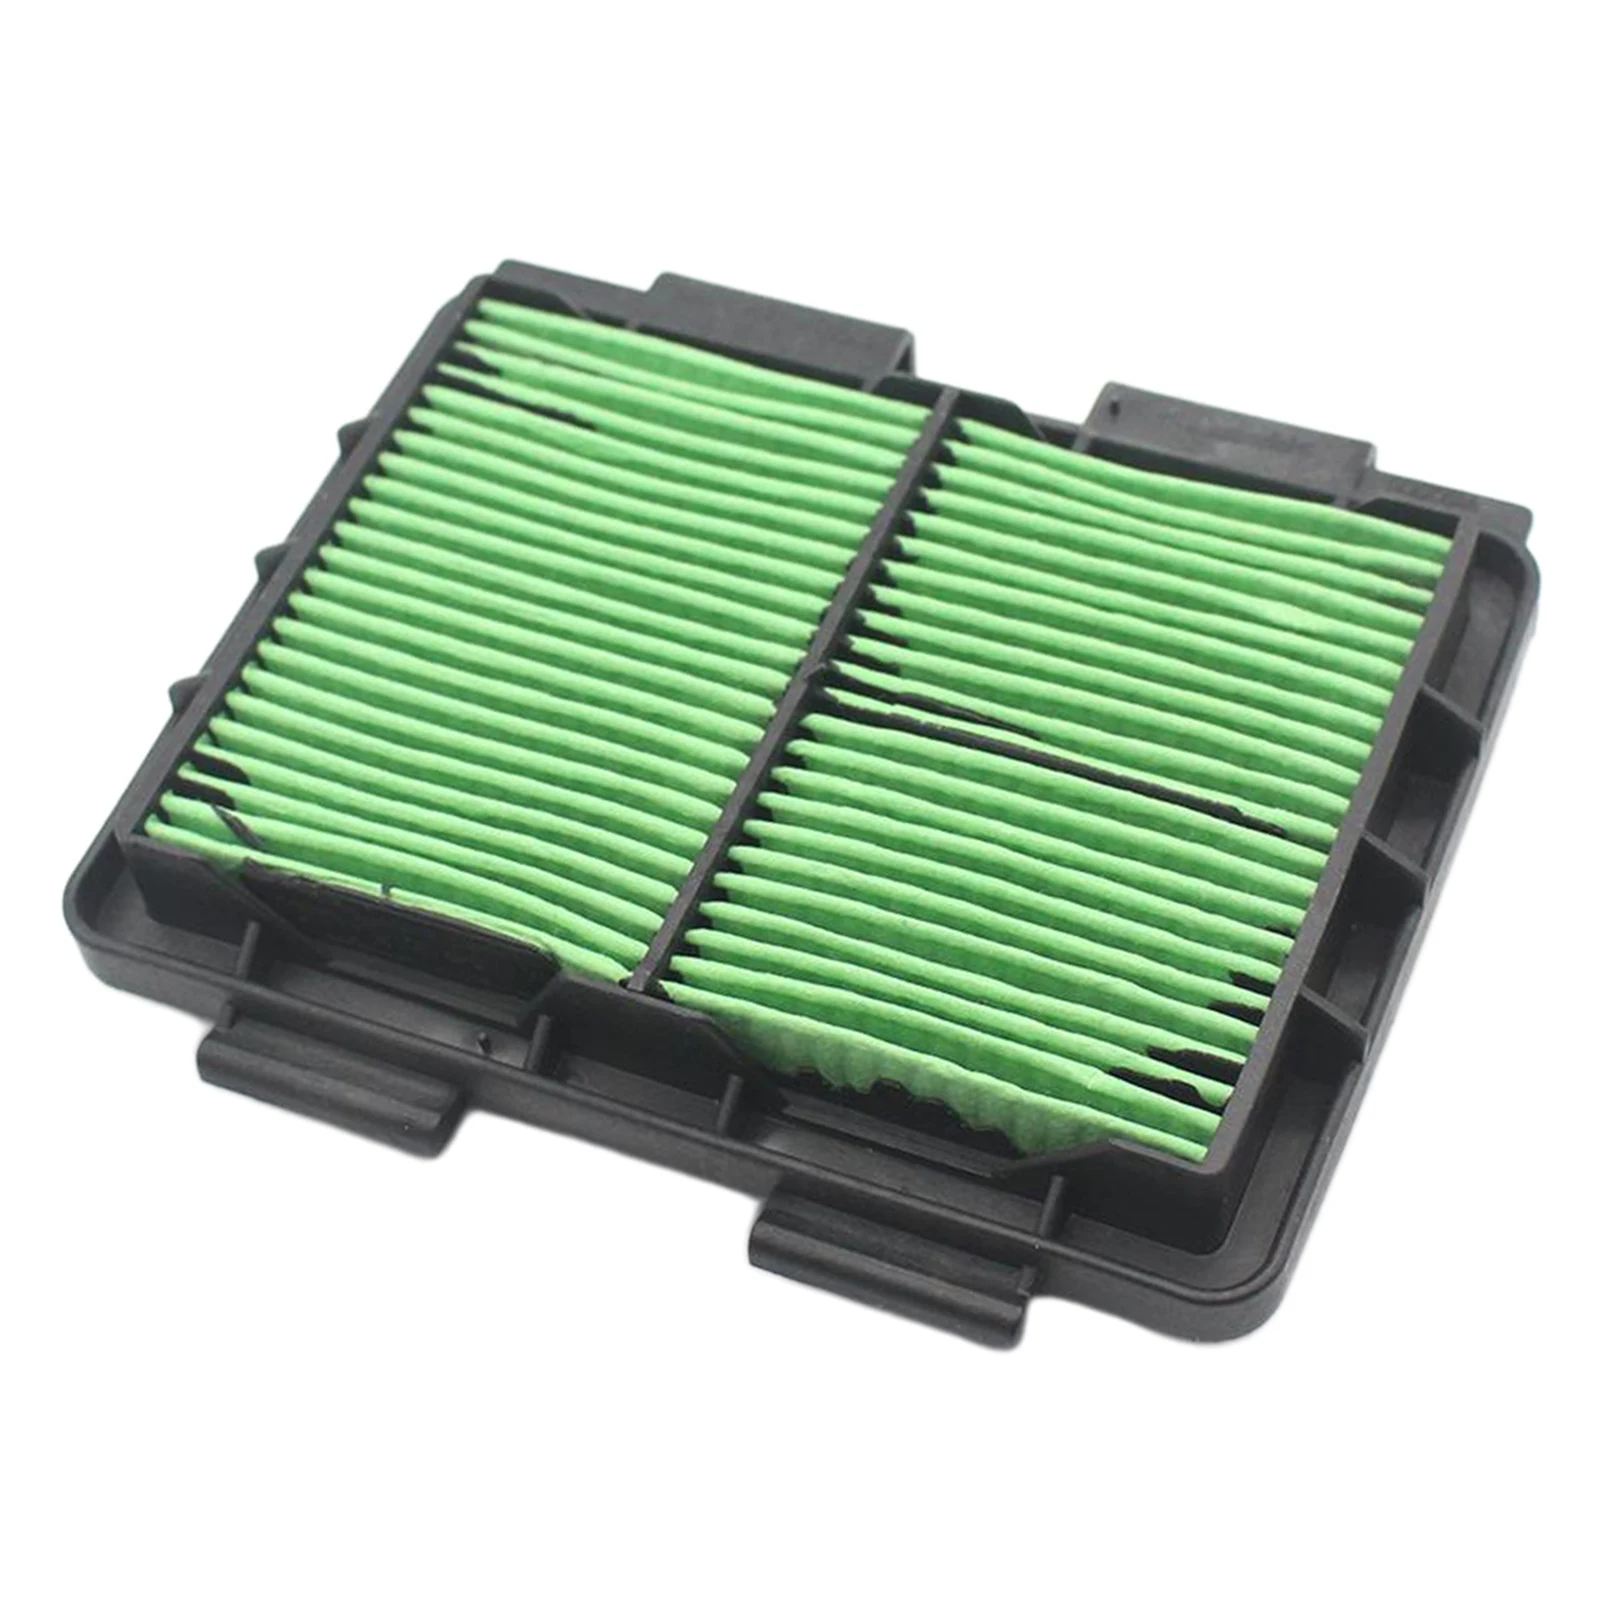 Motorcycle Air Filter Cleaner Replaces fits for HONDA CRF250L CRF250 2013 -2016, Professional Accessories